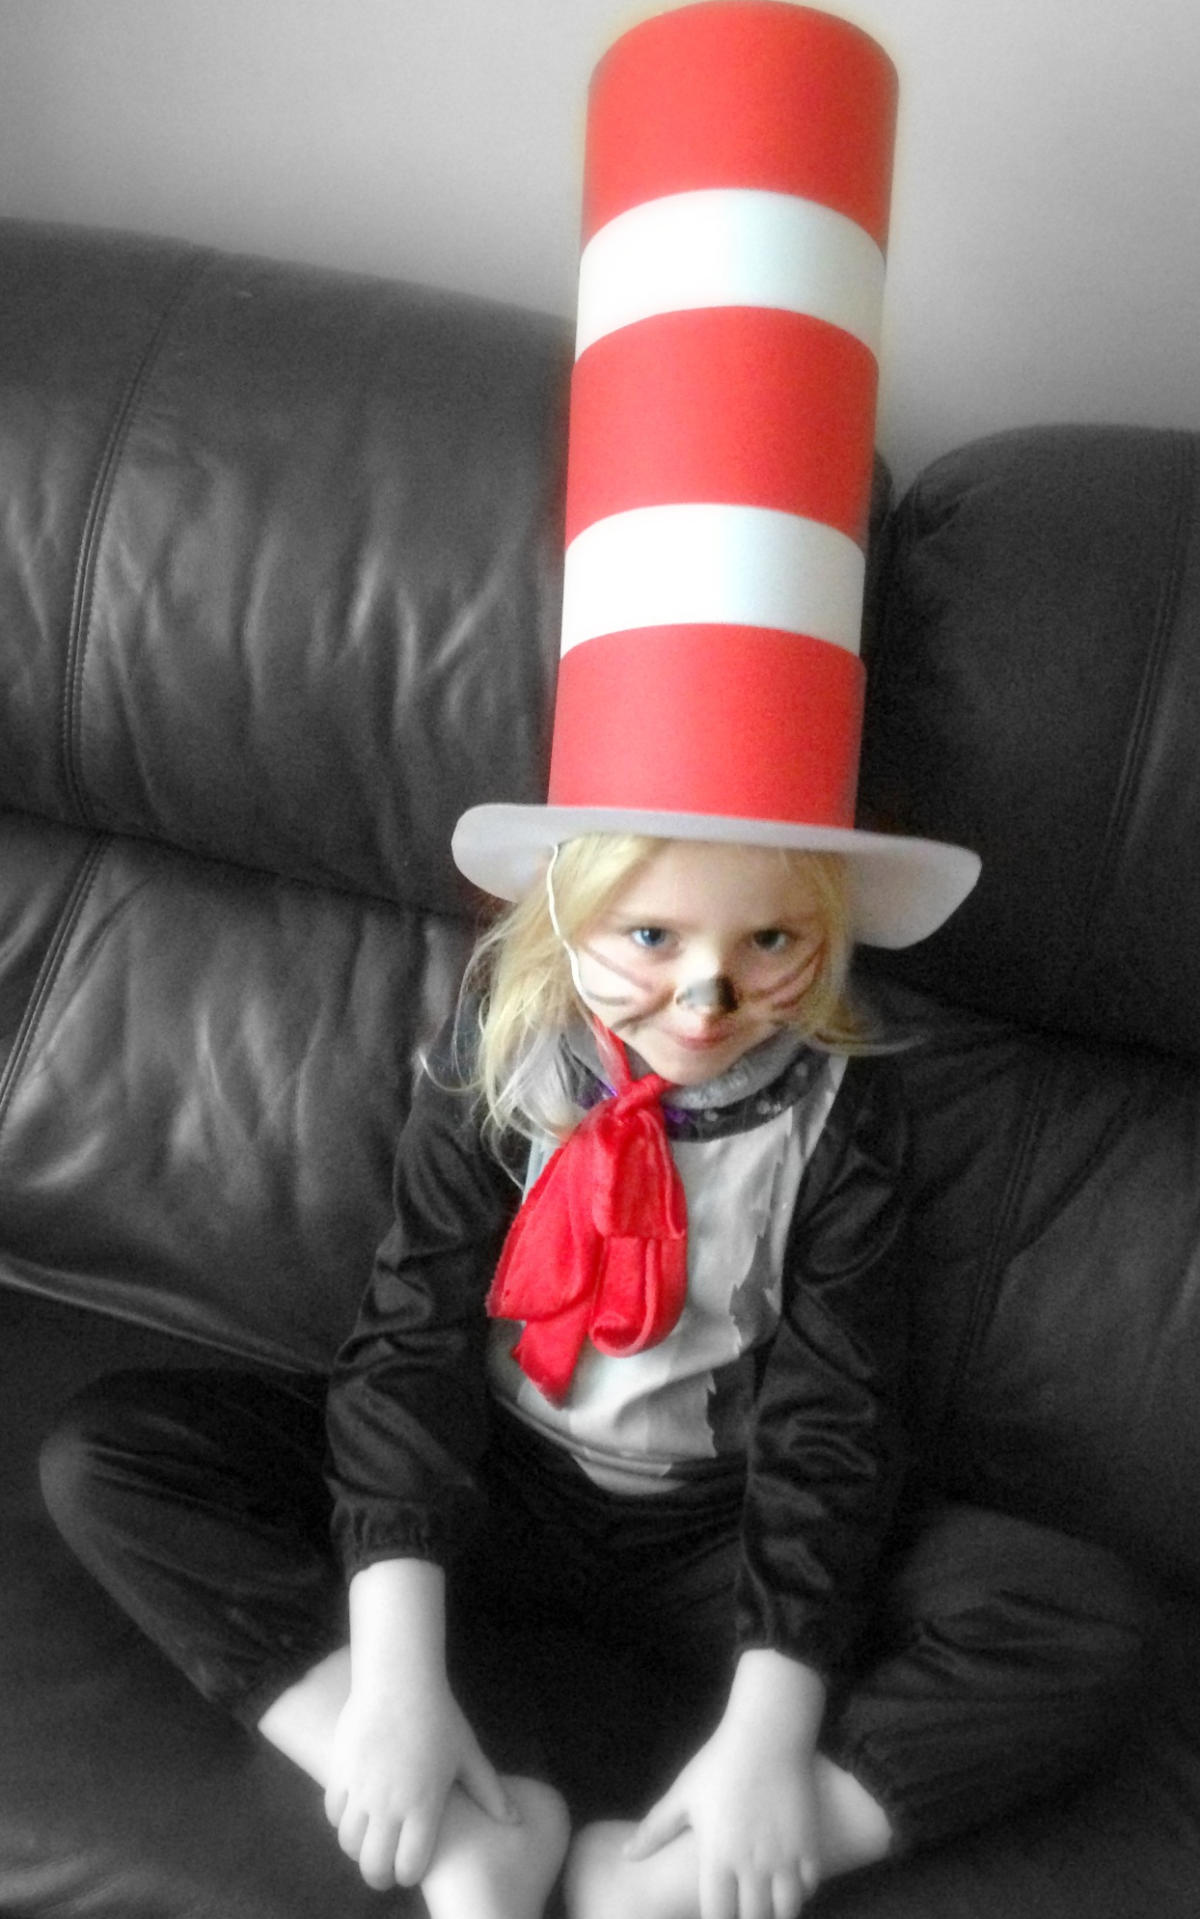 5 Easy costumes to make for World Book Day with Cricut - Cricut UK Blog